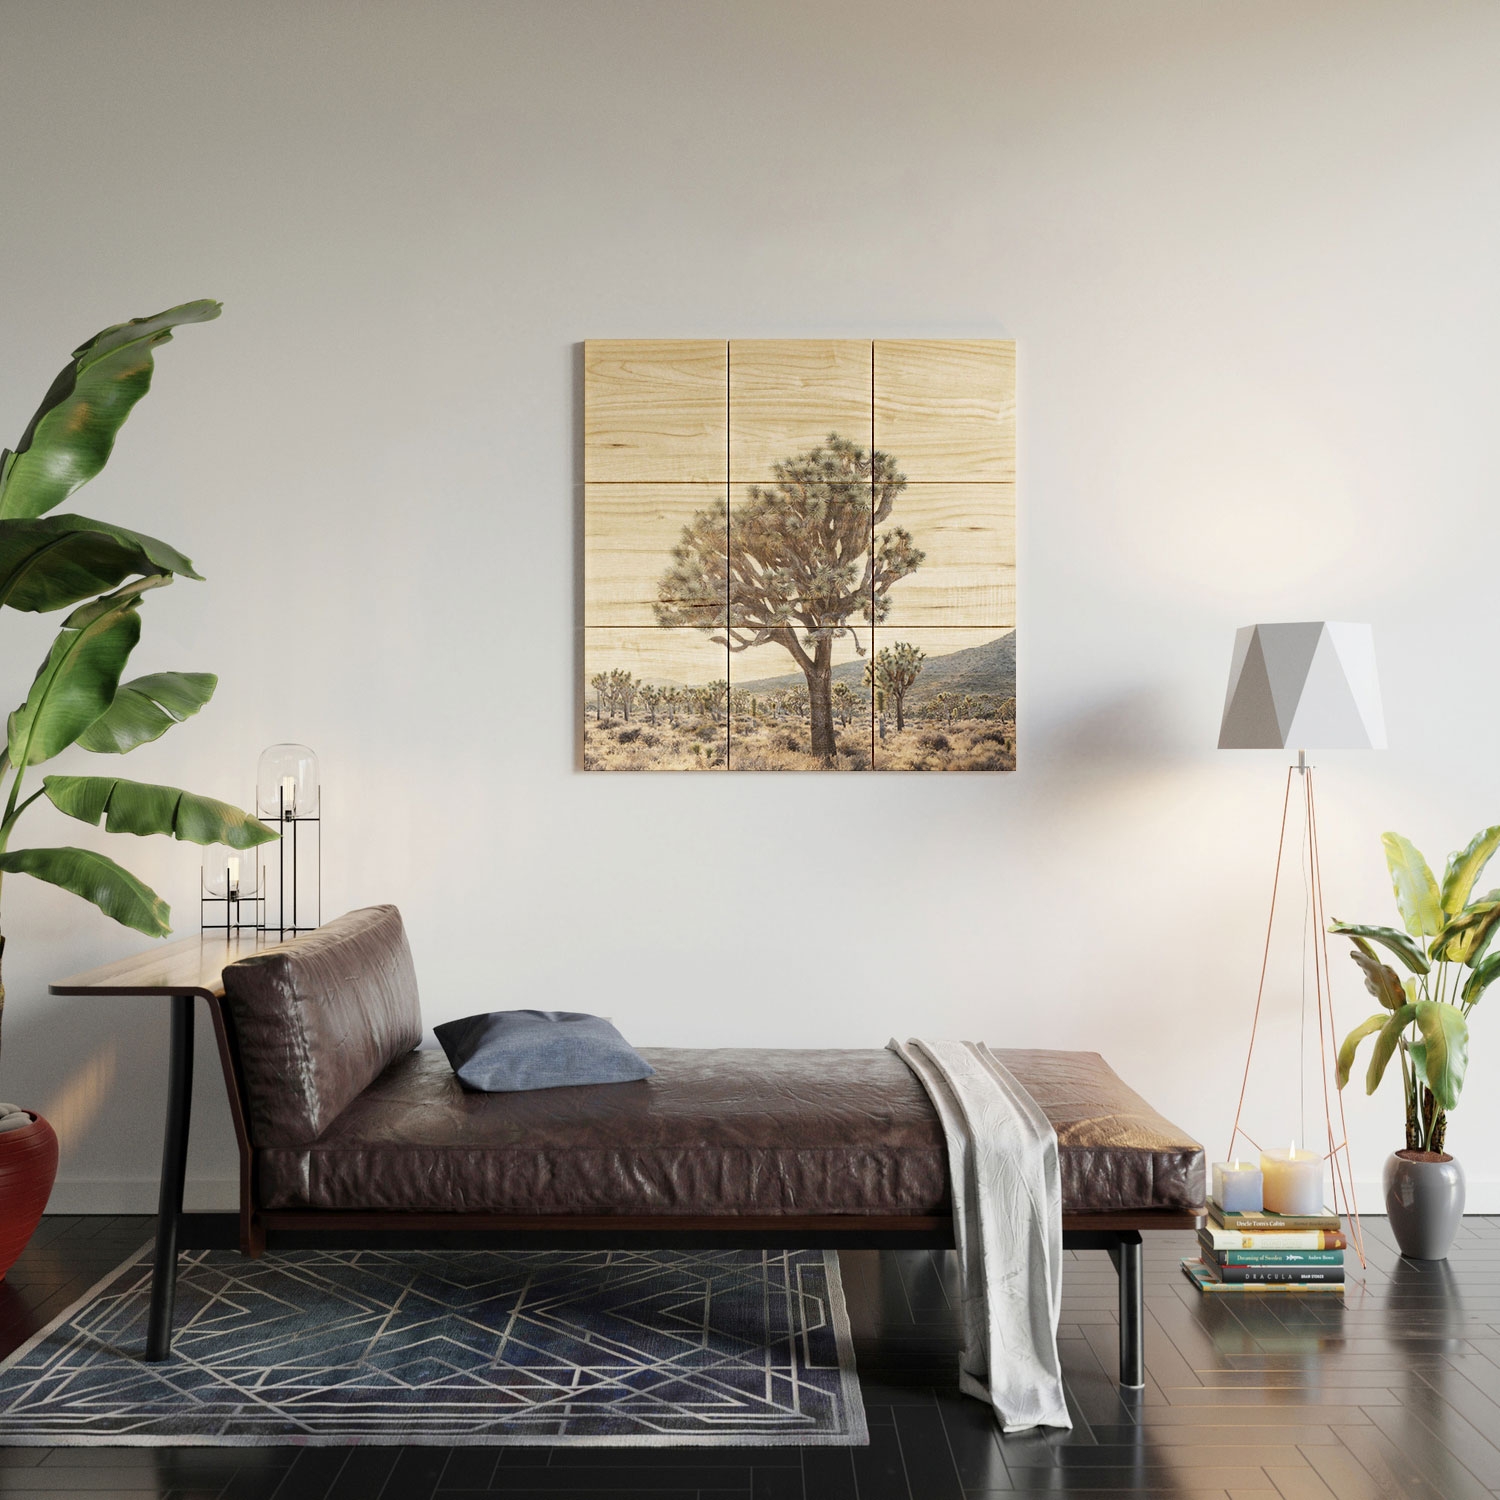 Desert Light by Bree Madden - Wood Wall Mural3' X 3' (Nine 12" Wood Squares) - Image 3